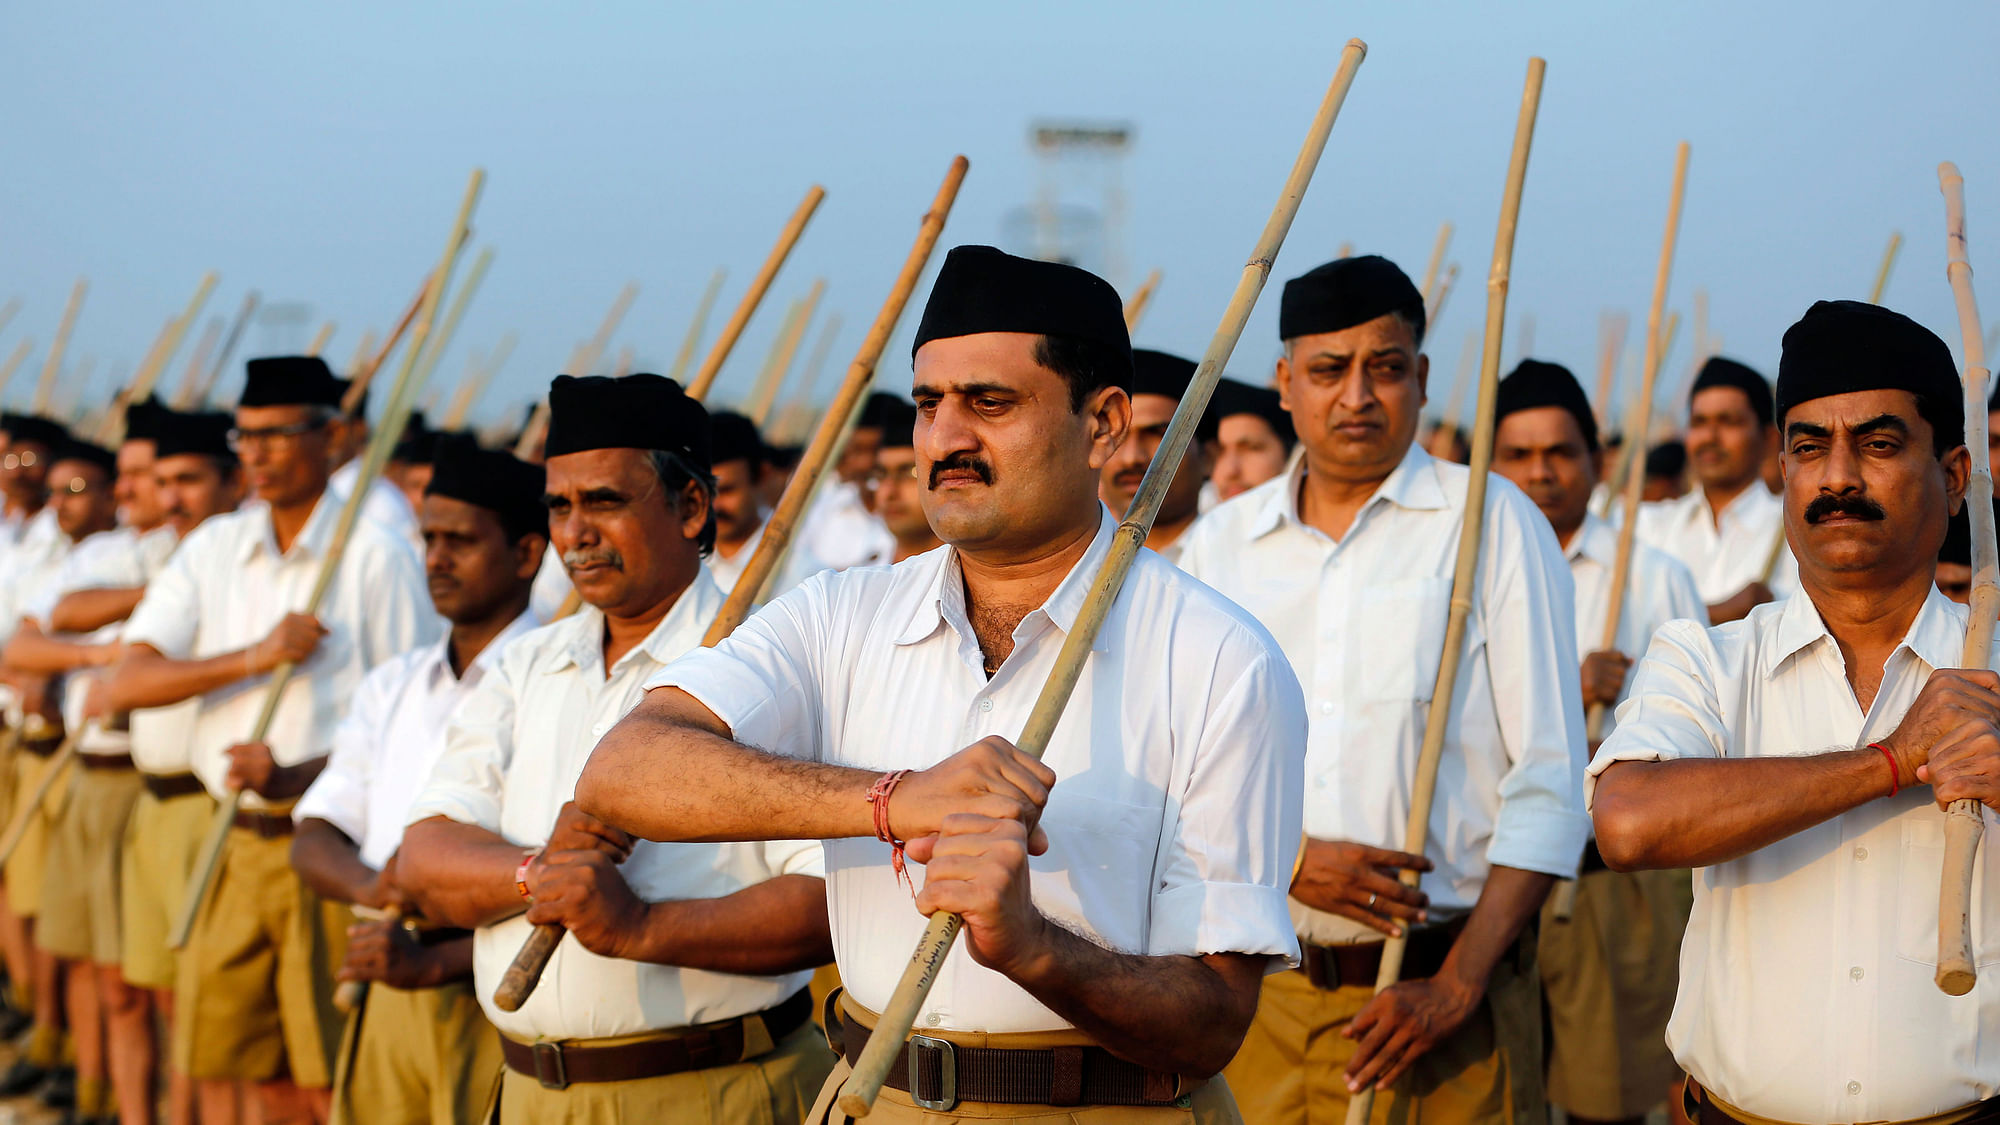 Volunteers of the RSS. Image used for representational purpose.